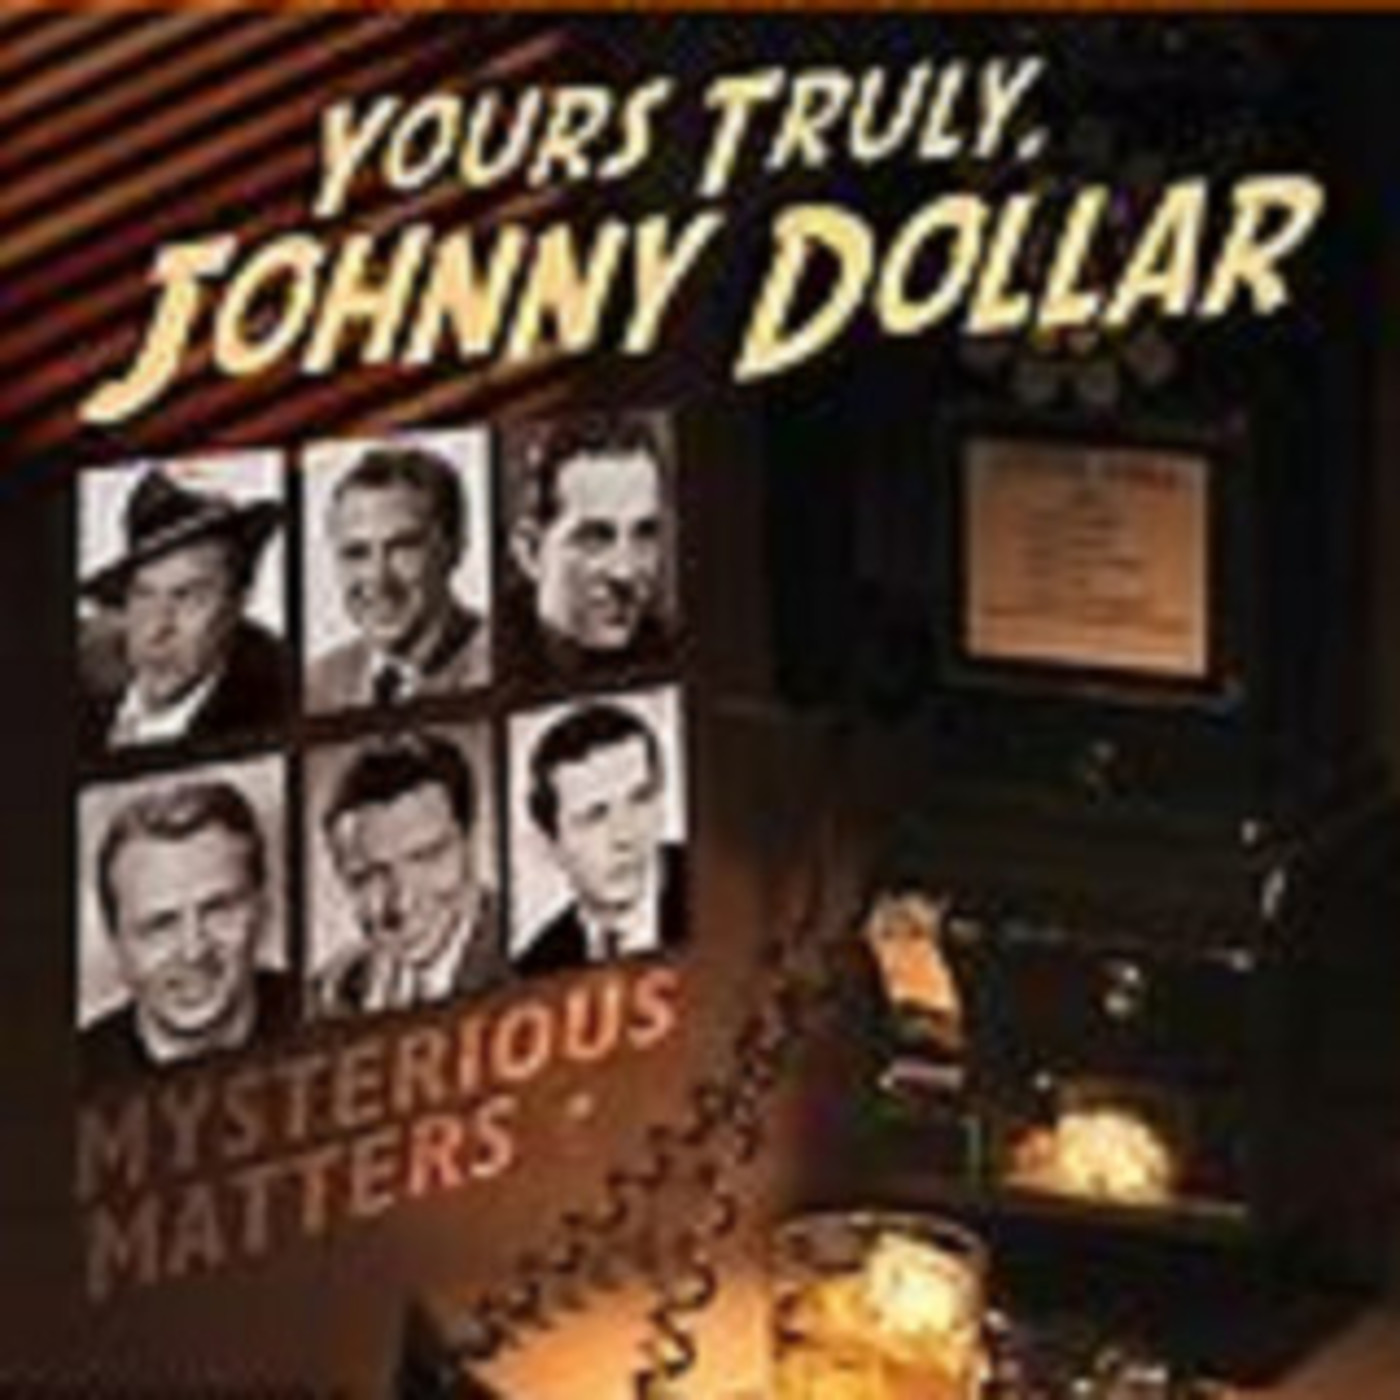 Yours Truly, Johnny Dollar - 100260, episode 708 - The Stroke of Death Matter